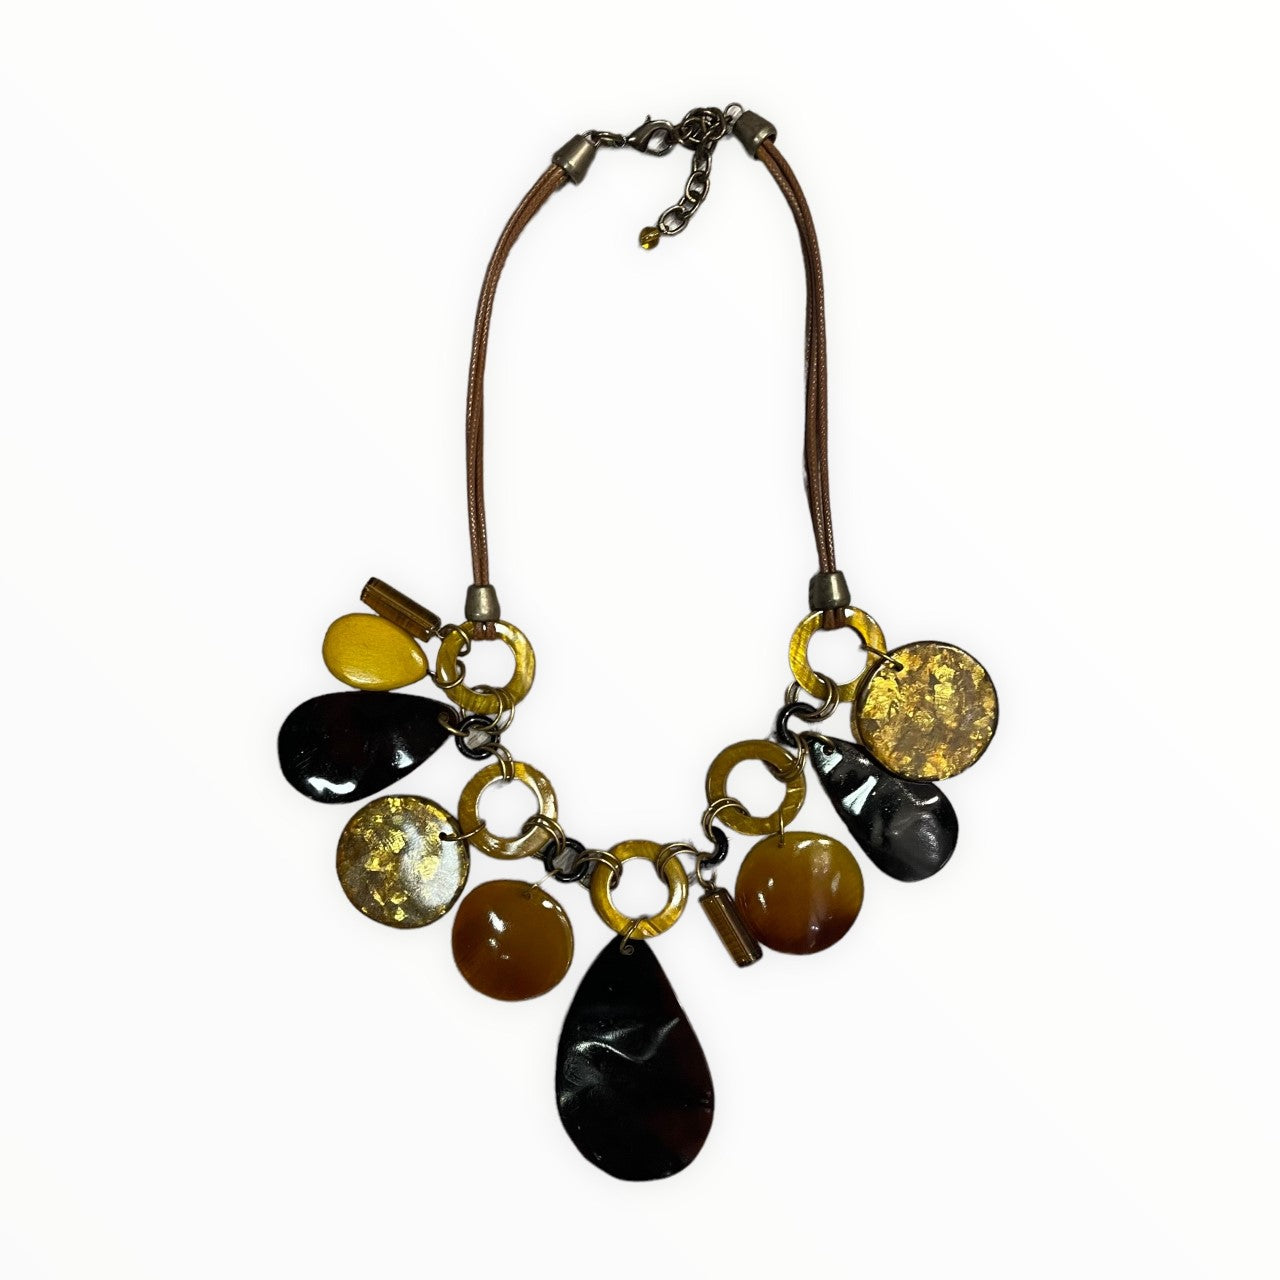 AMBER BROWN MIX PENDANT NECKLACE Necklaces FashionWear Collection Amber/Brown 